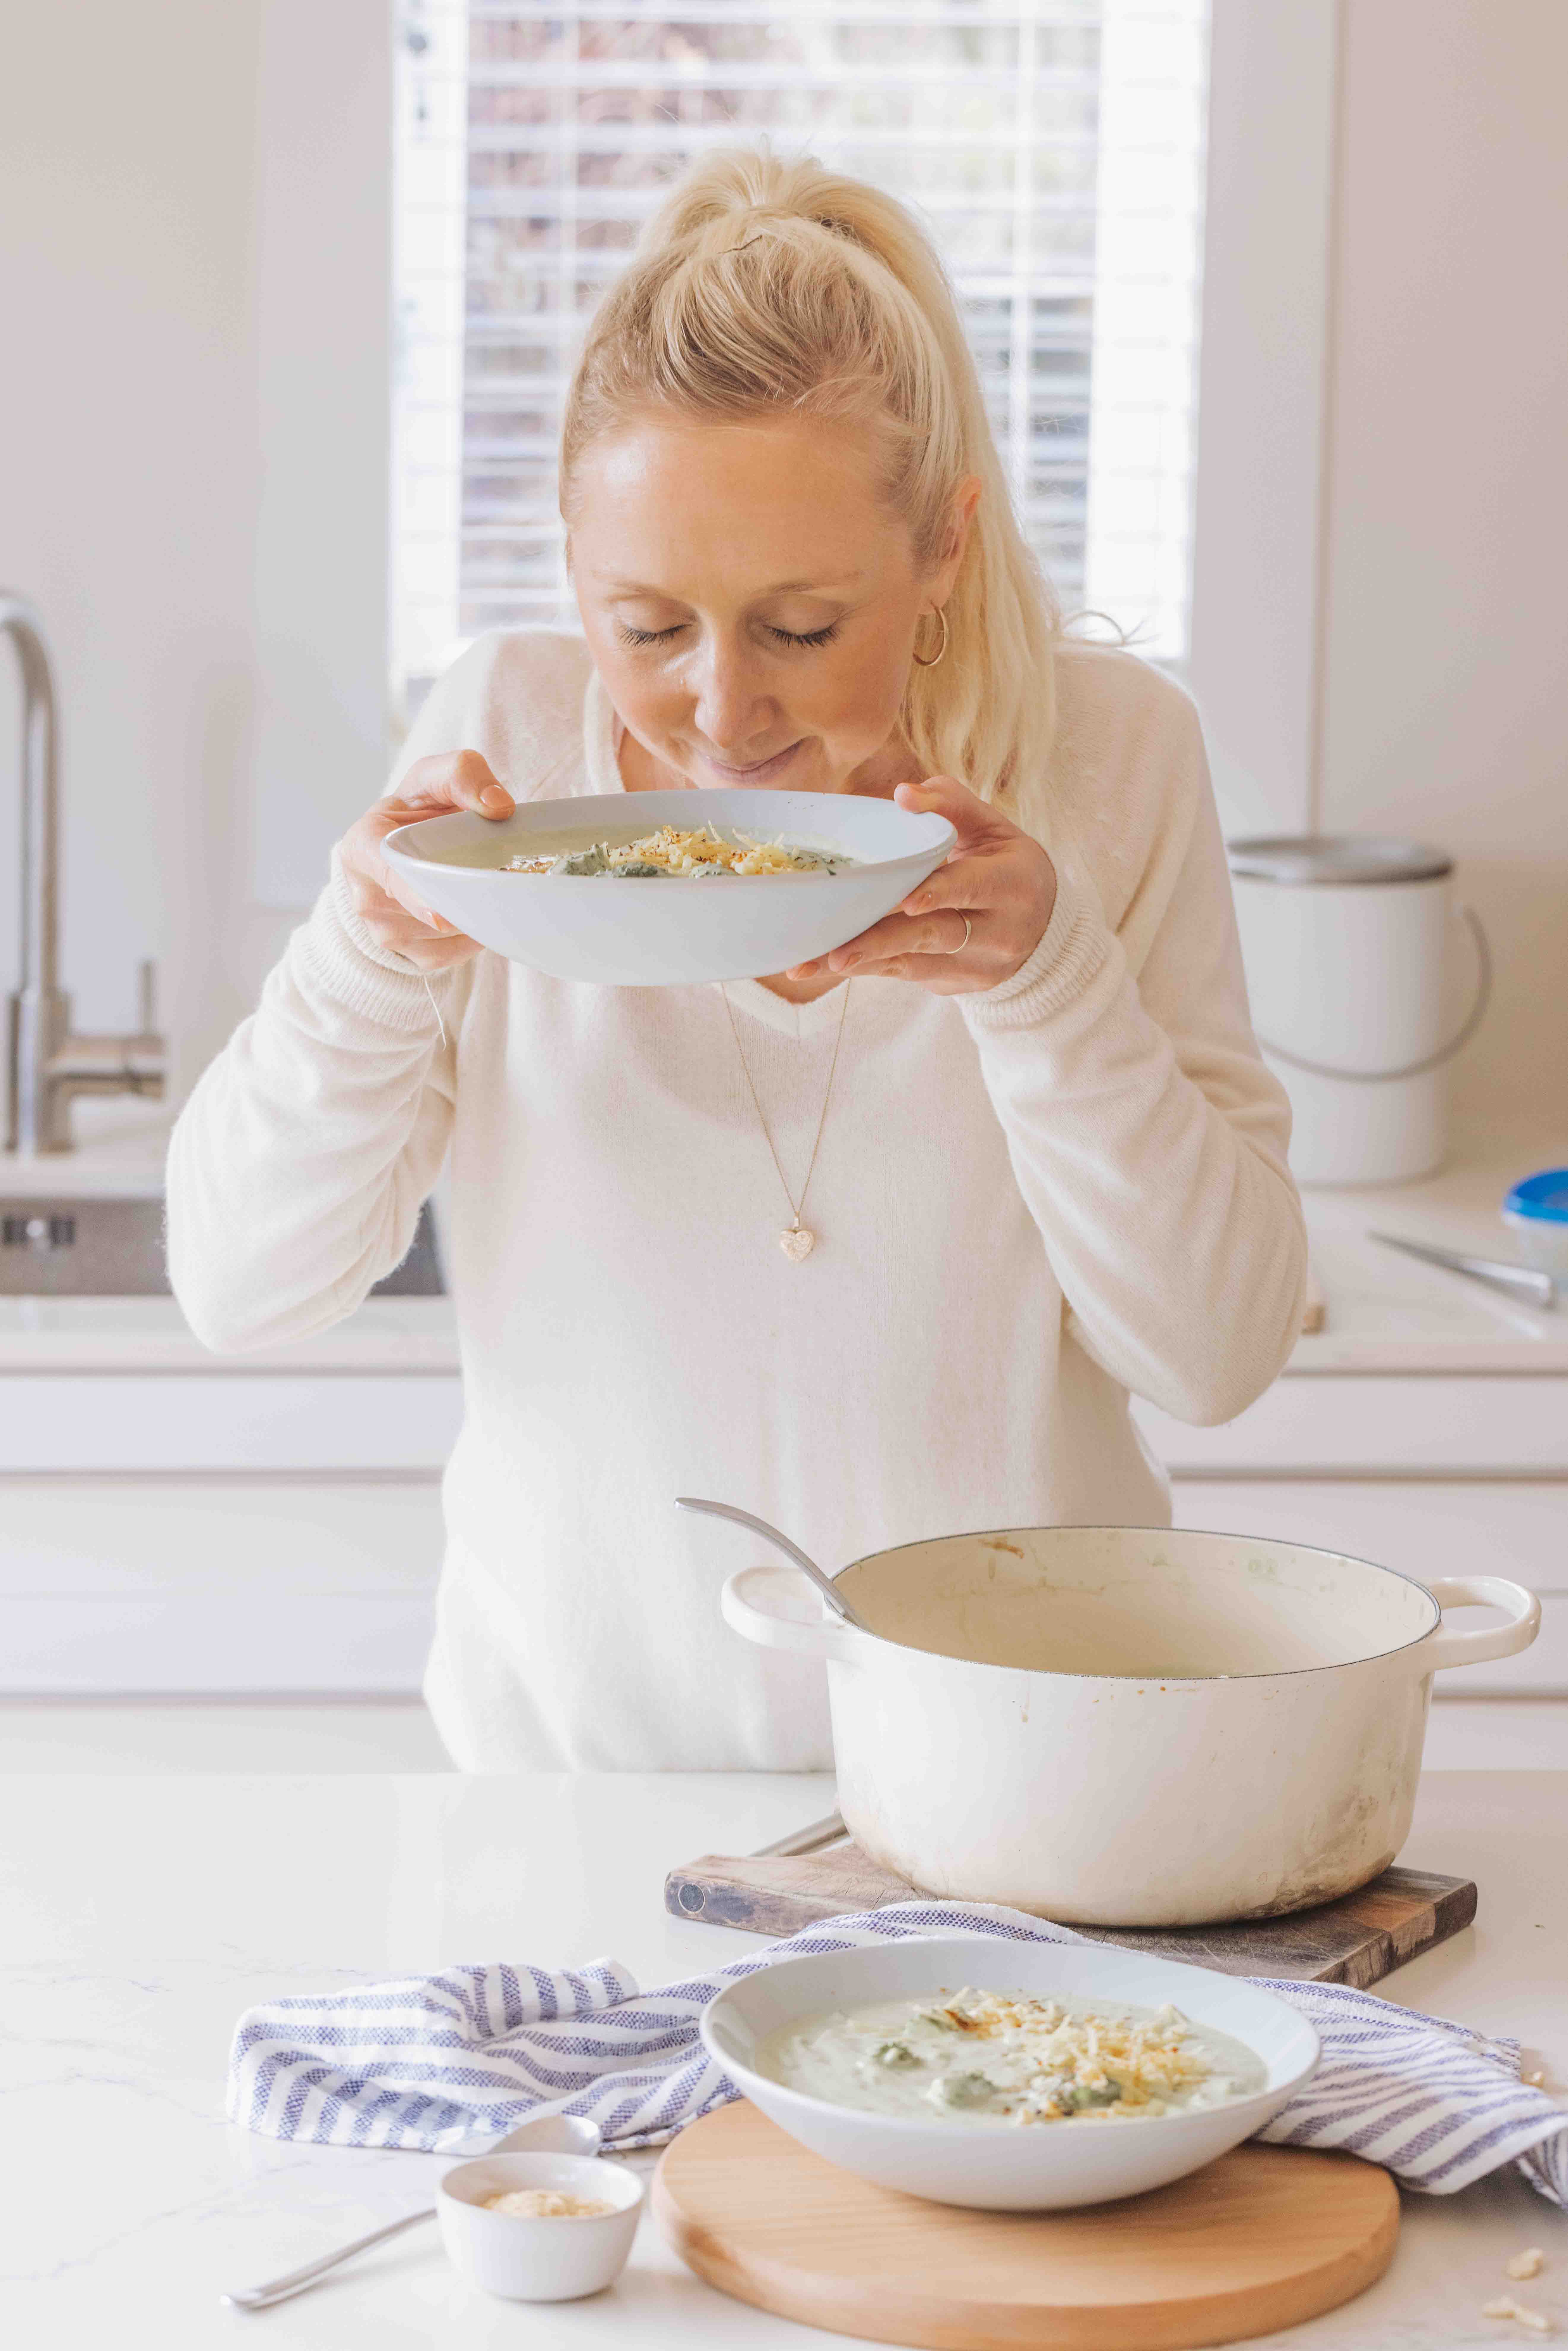 Woman (Buffy Ellen Gill) smelling a bowl of creamy broccoli soup, with a large Le Creuset crock pot in front.